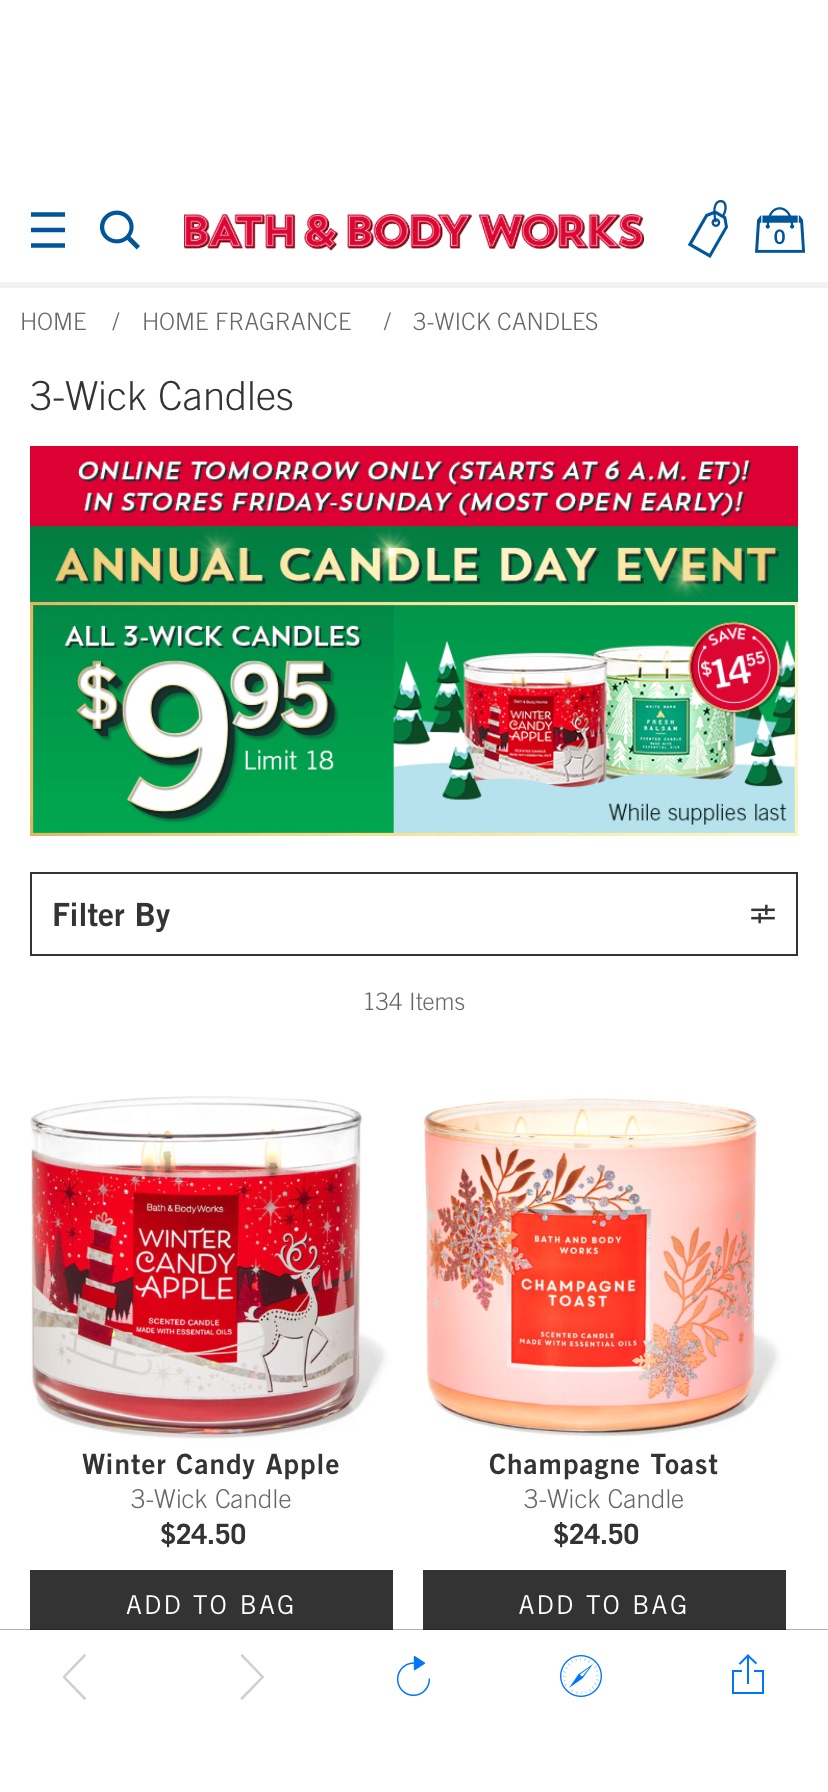 3-Wick Scented Candles - Bath & Body Works 一年一度香薰蜡烛日